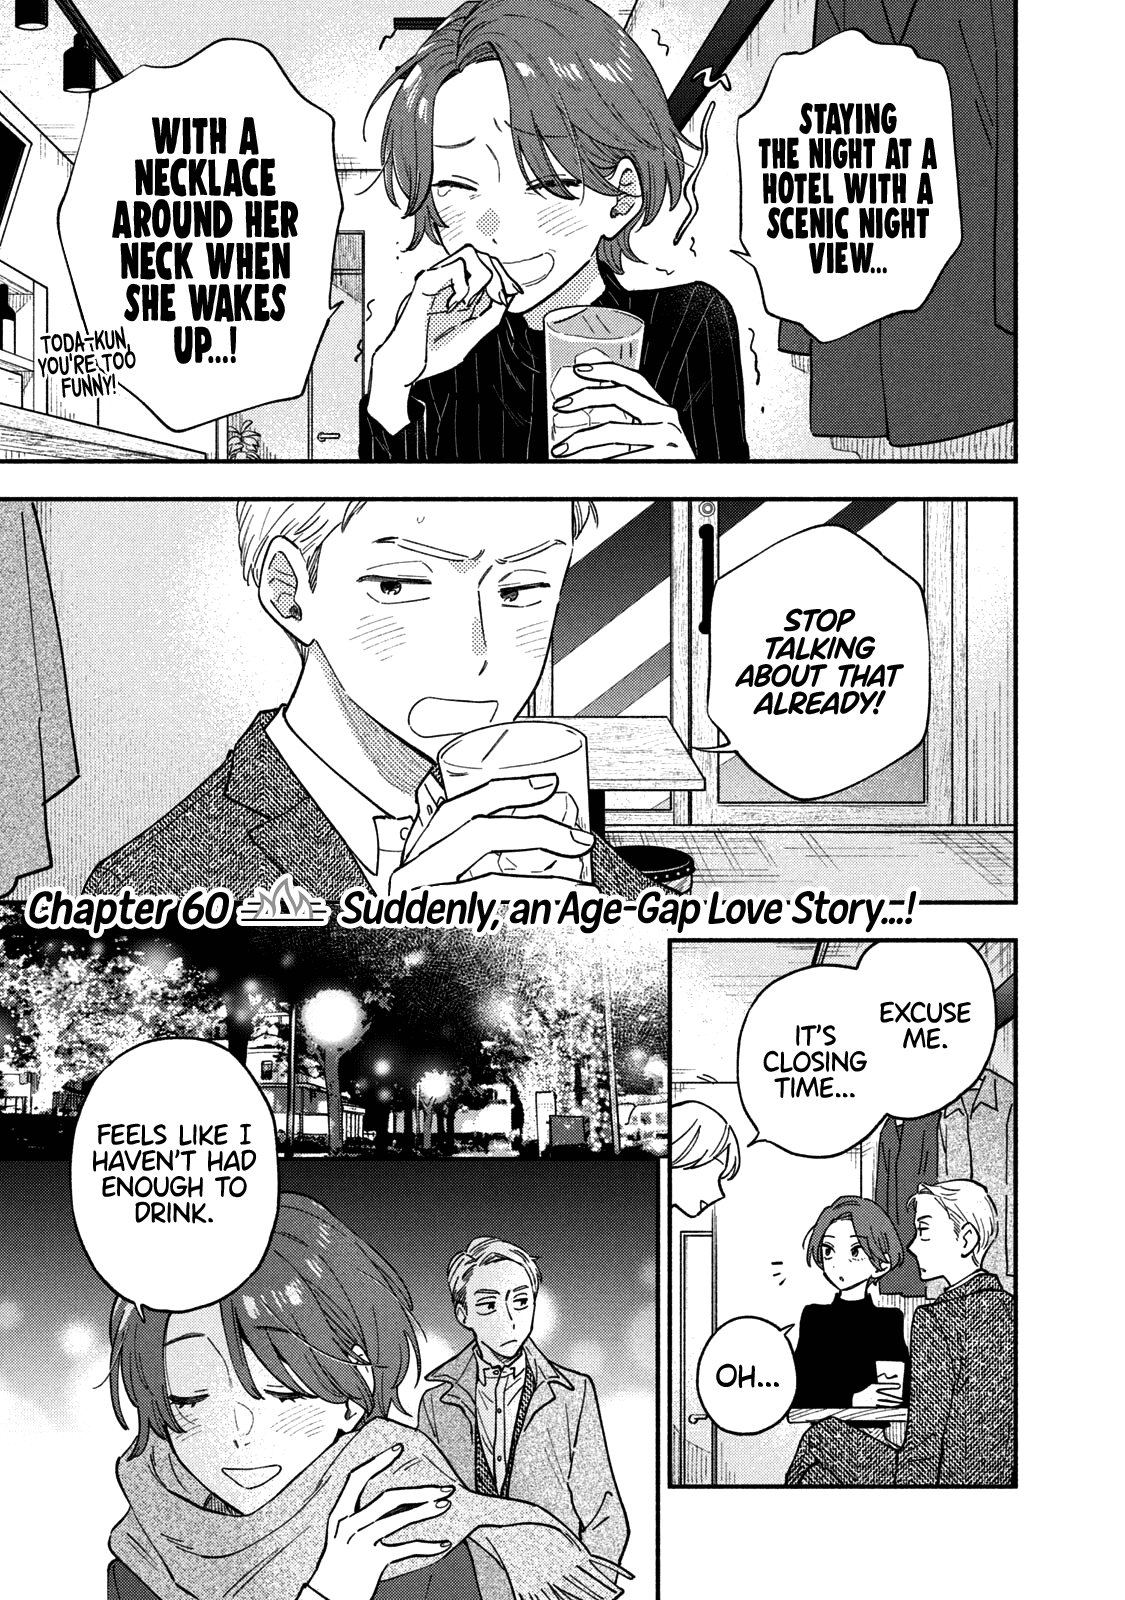 A Rare Marriage: How To Grill Our Love Vol.7 Chapter 60: Suddenly, An Age-Gap Love Story...! - Picture 2